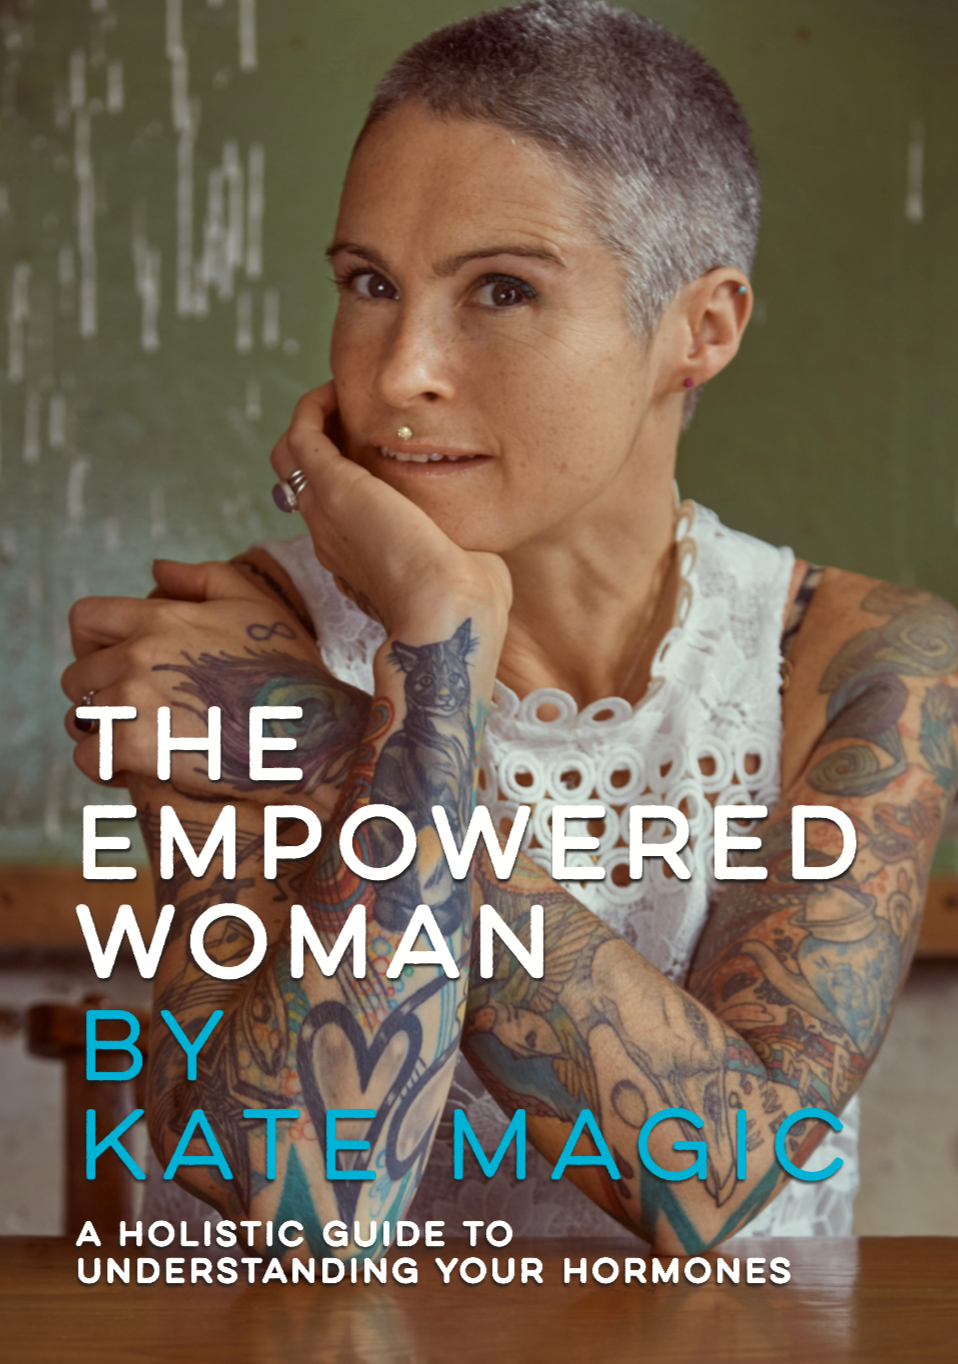 Empowered Woman (e-Book) | Kate Magic | Raw Living UK | Books | In her acclaimed book, &#39;The Empowered Woman,&#39; Kate Magic looks at the challenges faced by women in the 21st century, and offers constructive and hopeful advice.